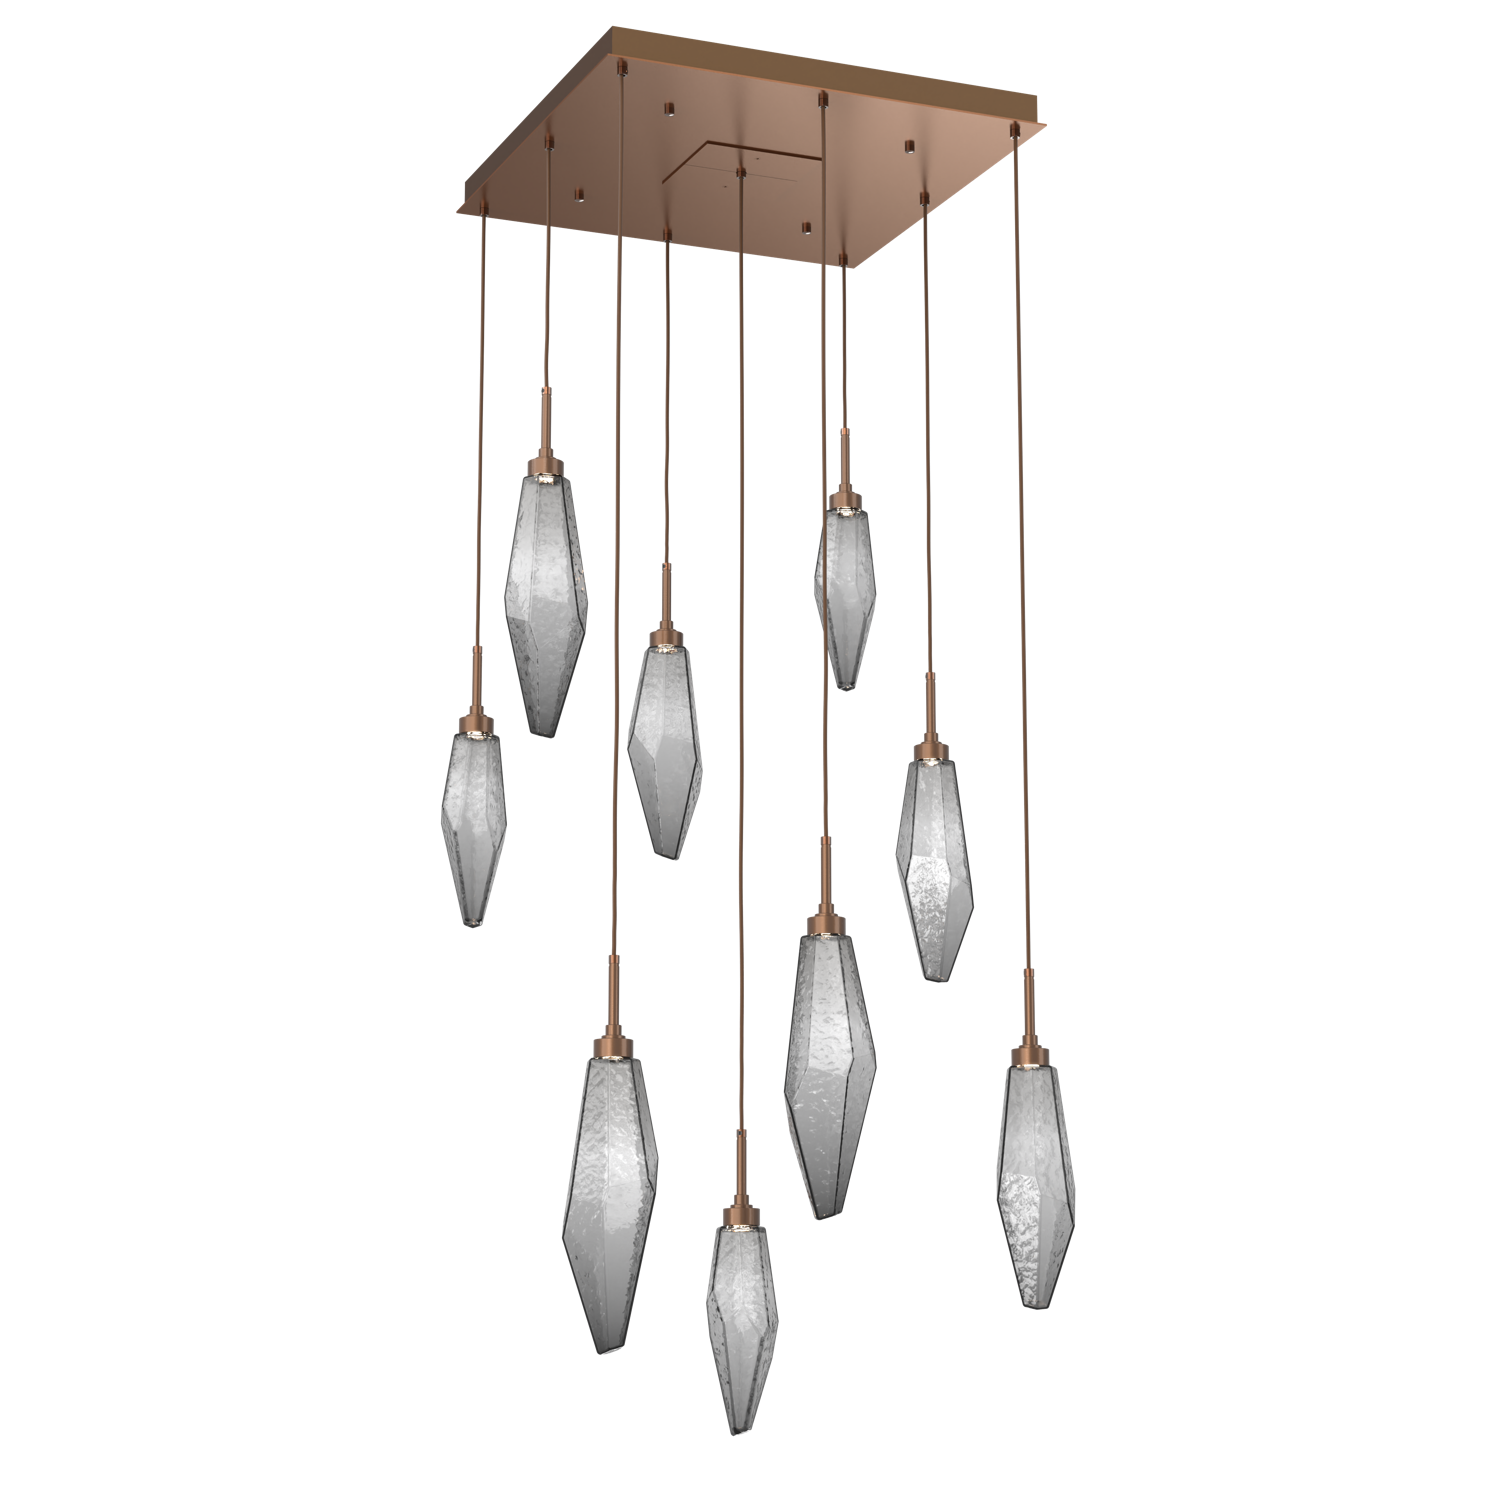 CHB0050-09-BB-CS-Hammerton-Studio-Rock-Crystal-9-light-square-pendant-chandelier-with-burnished-bronze-finish-and-chilled-smoke-glass-shades-and-LED-lamping